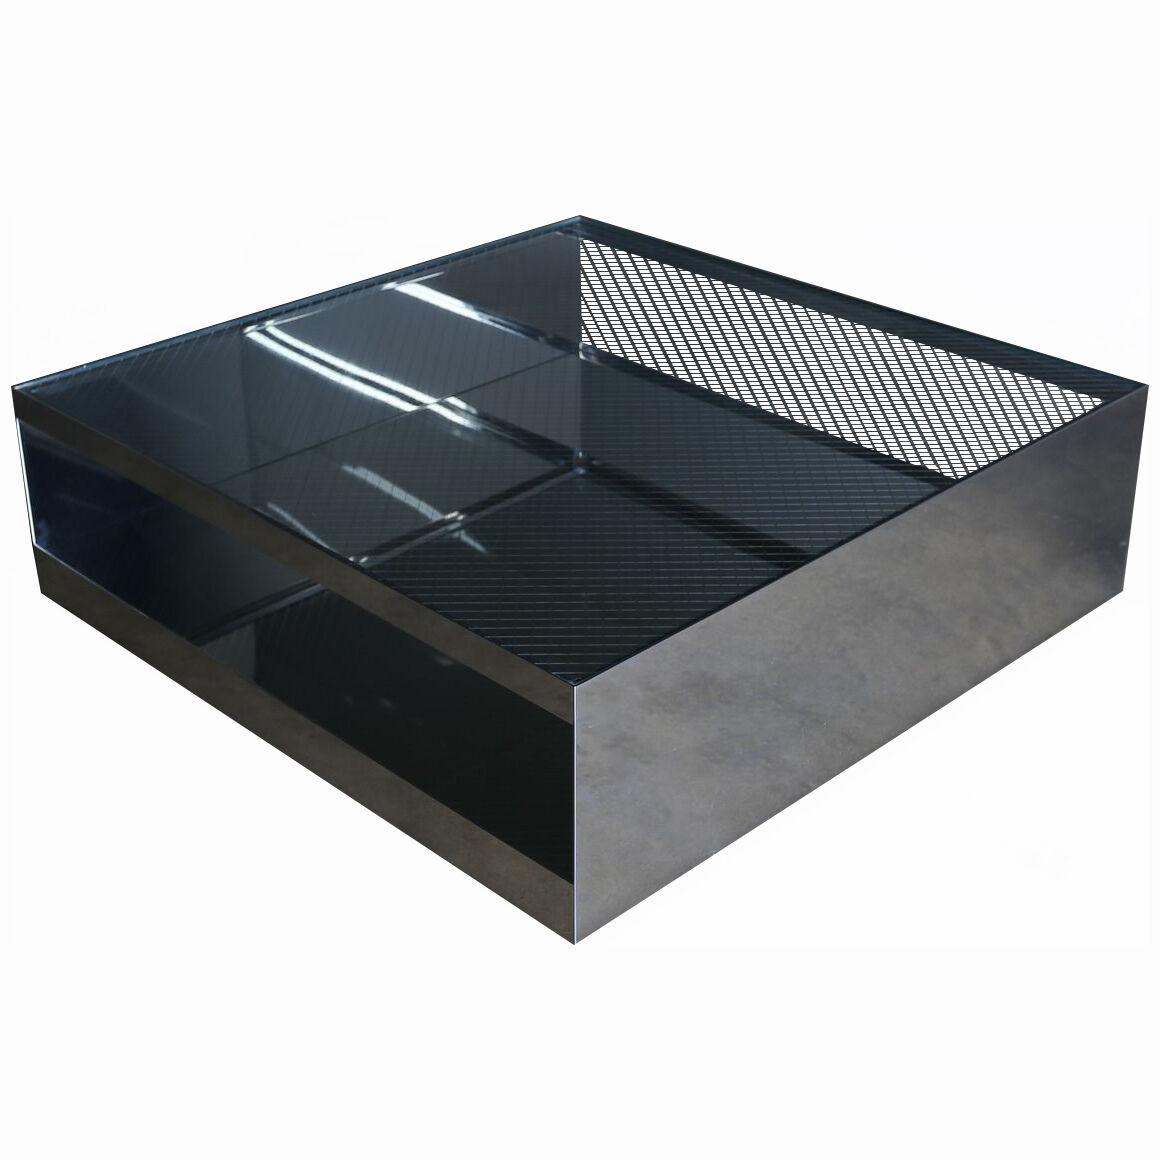 Joe D'urso Polished Stainless Steel Coffee Table for Knoll, circa 1981